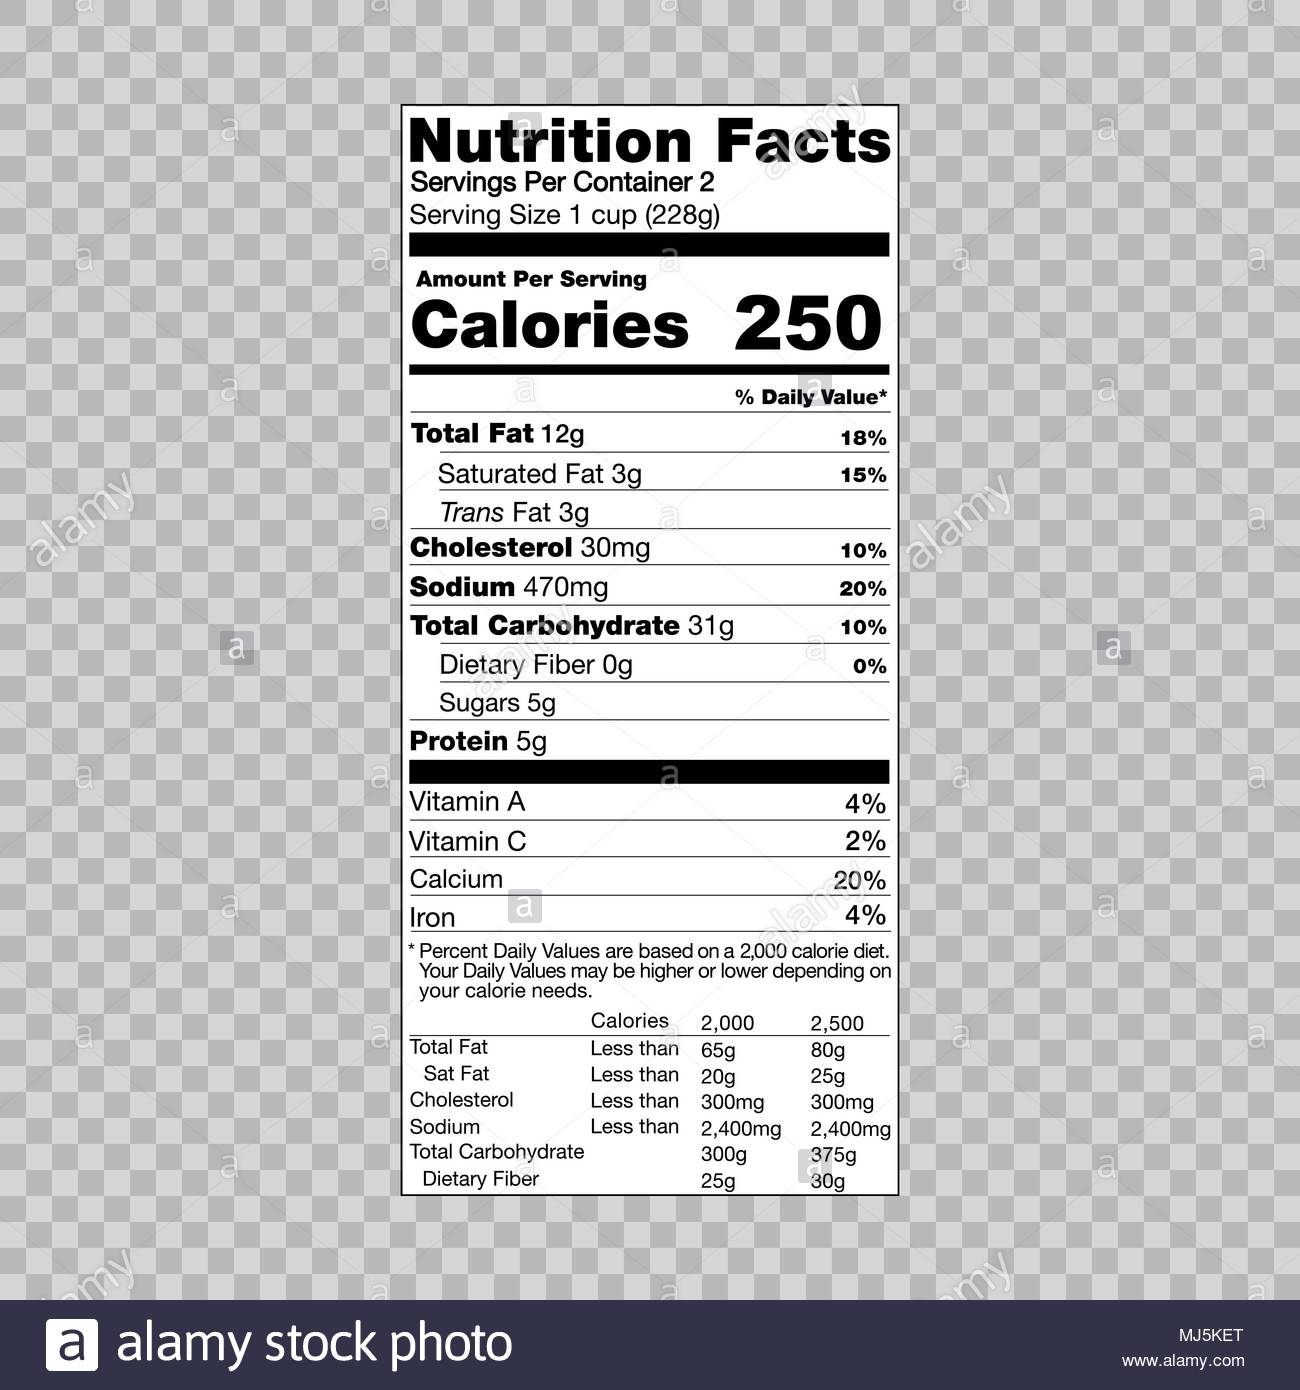 Nutrition Facts Information Template For Food Label Stock Intended For Blank Food Label Template